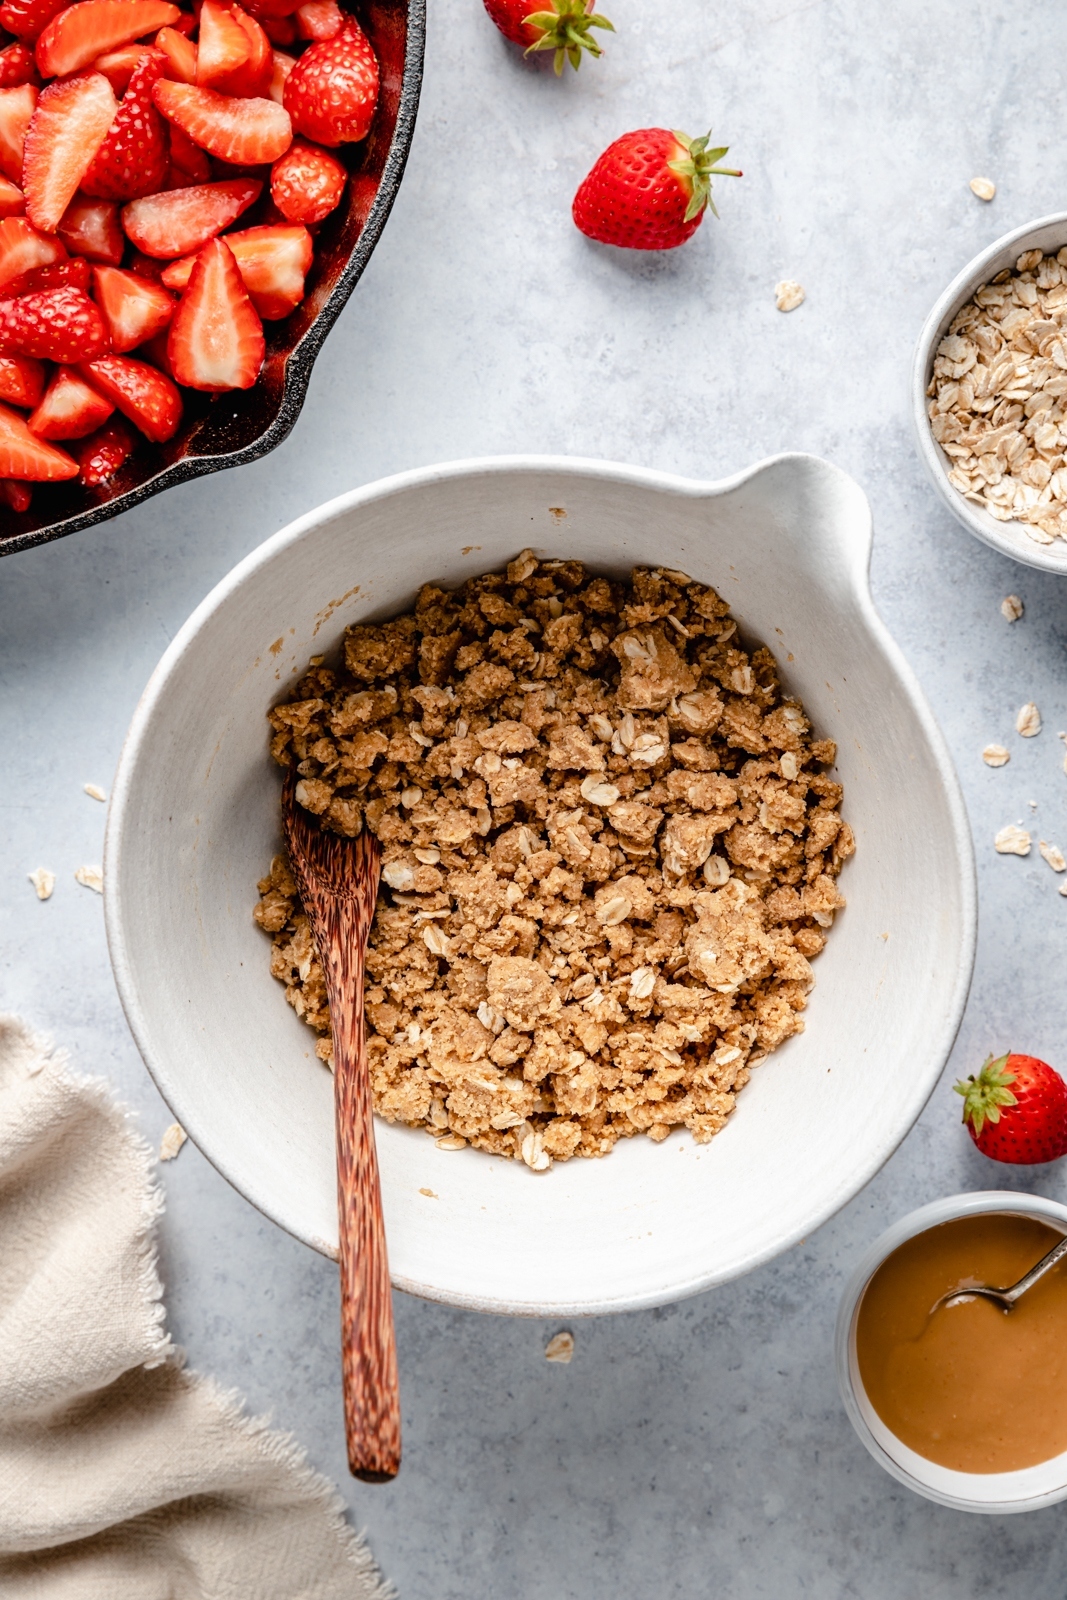 mixing a peanut butter oatmeal cookie crumble topping for strawberry crisp